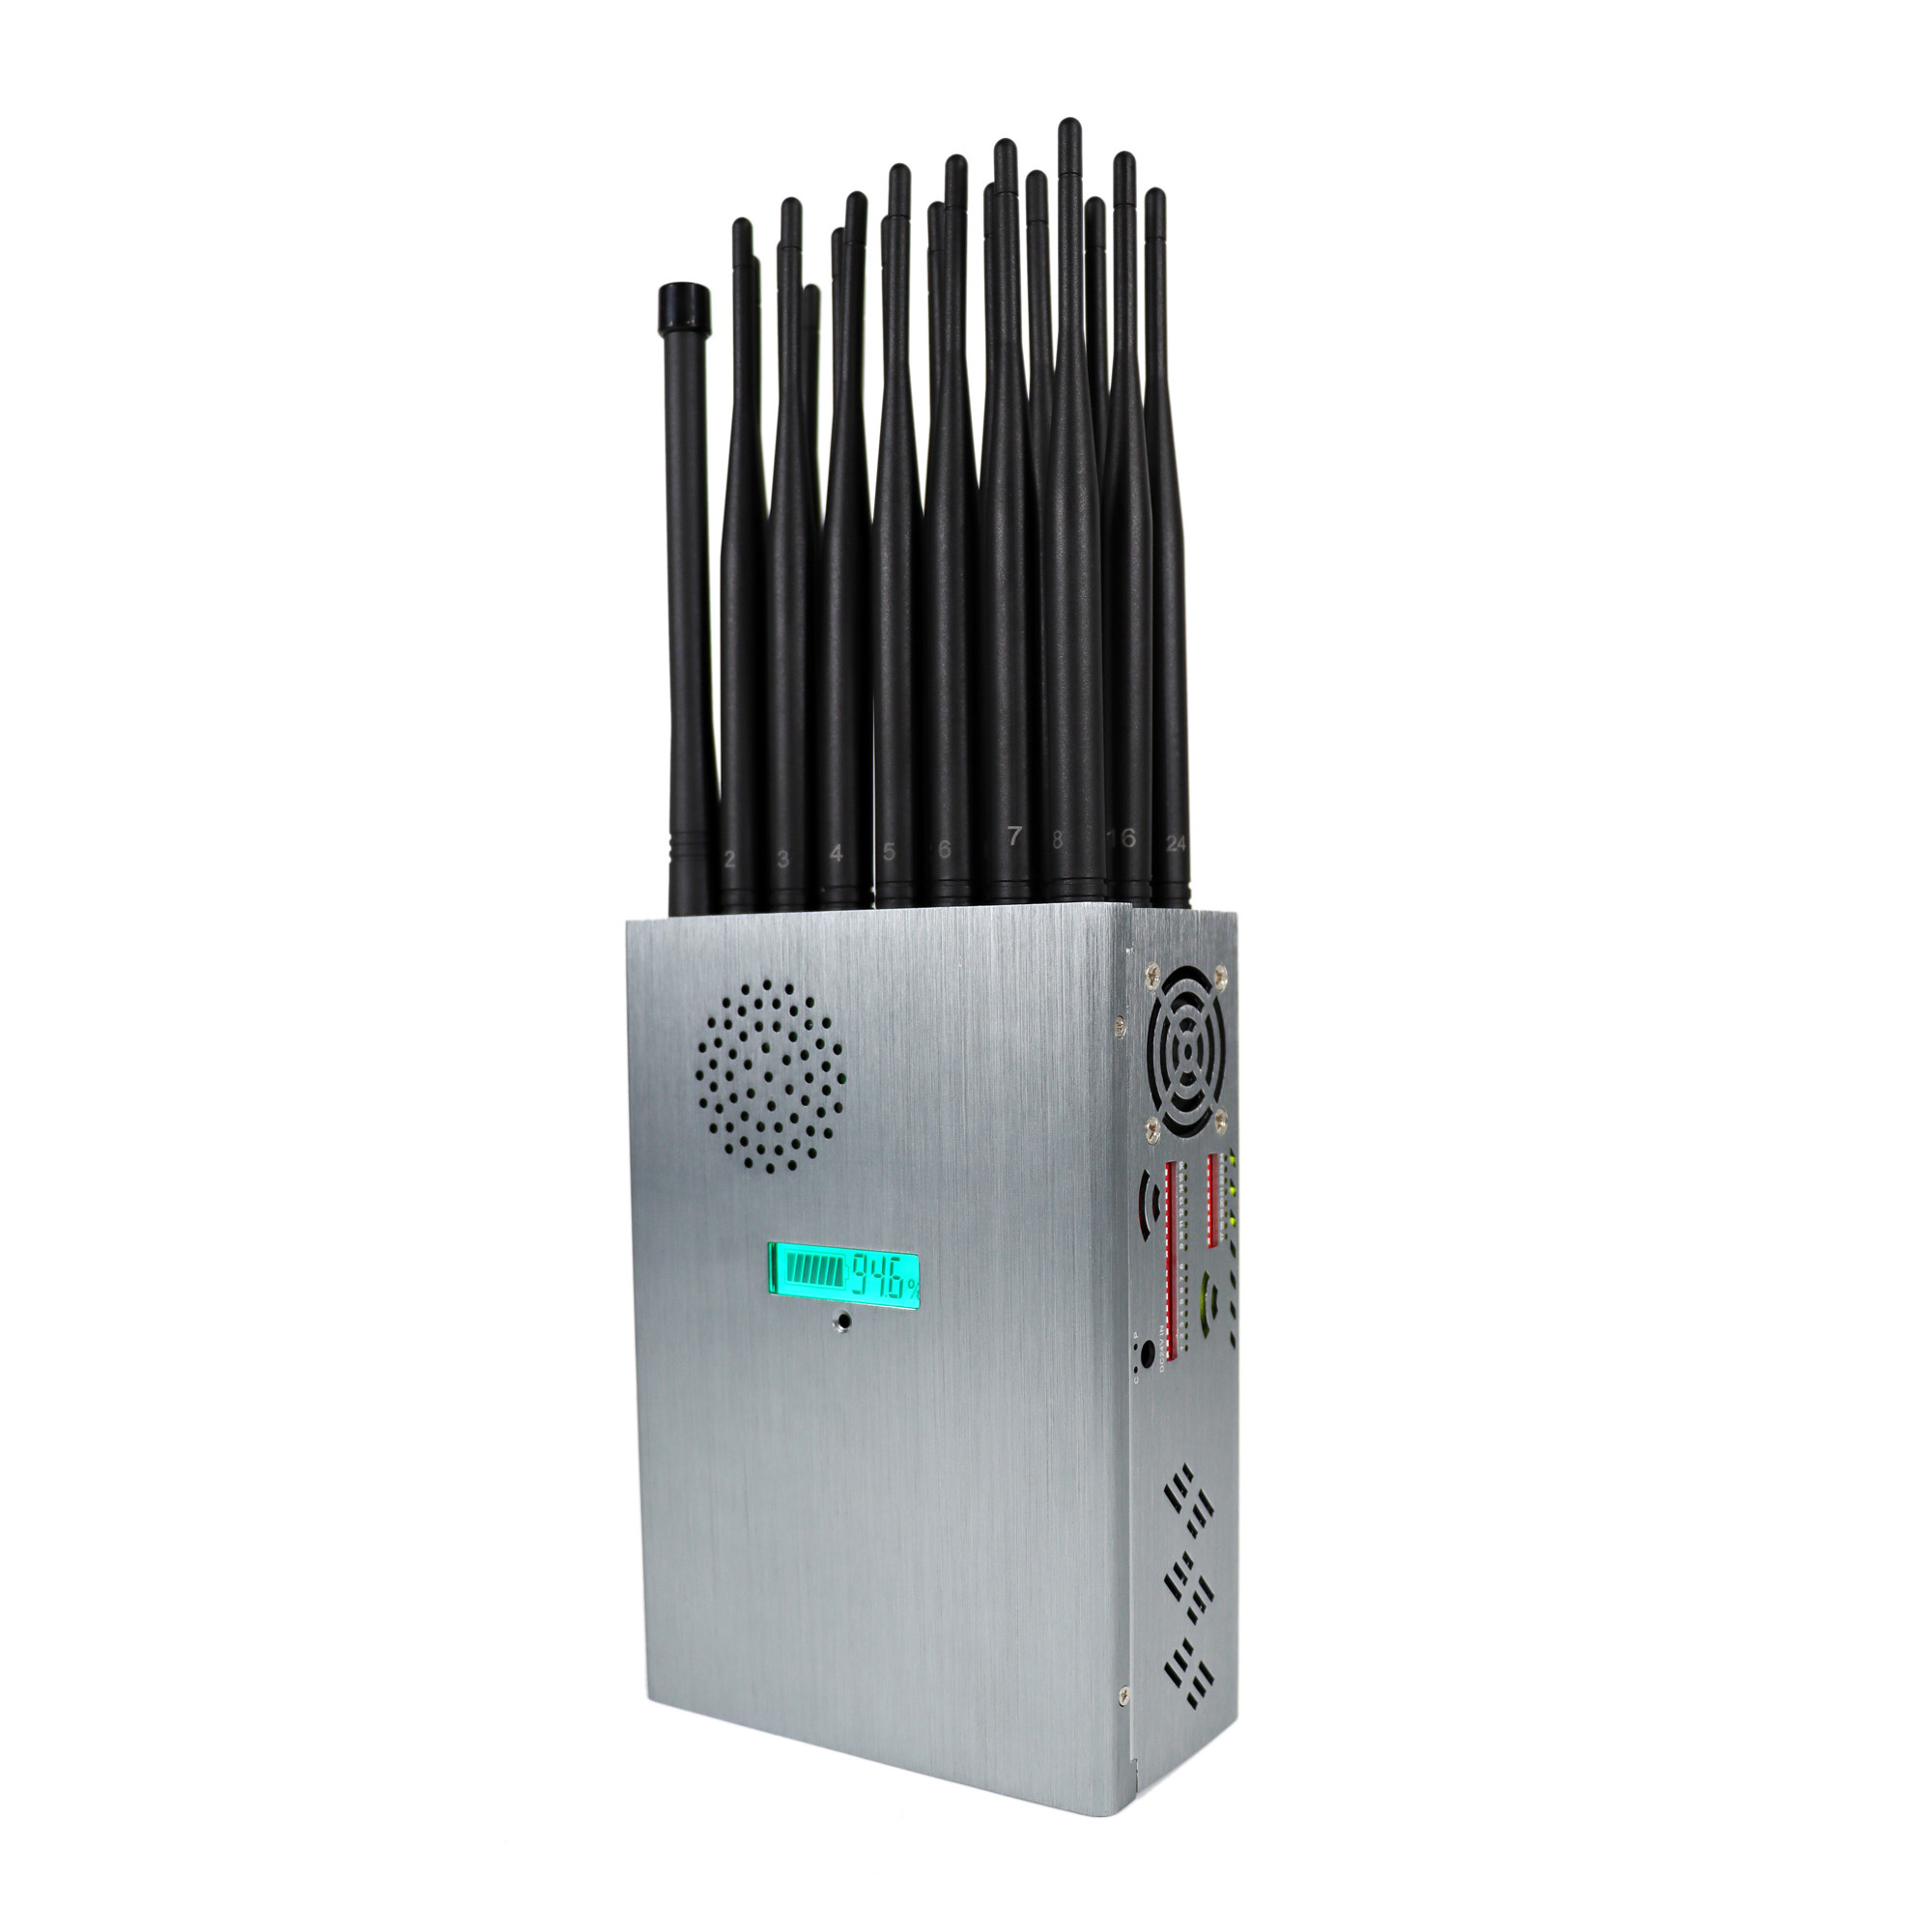 Portable Mobile Phone Jammer